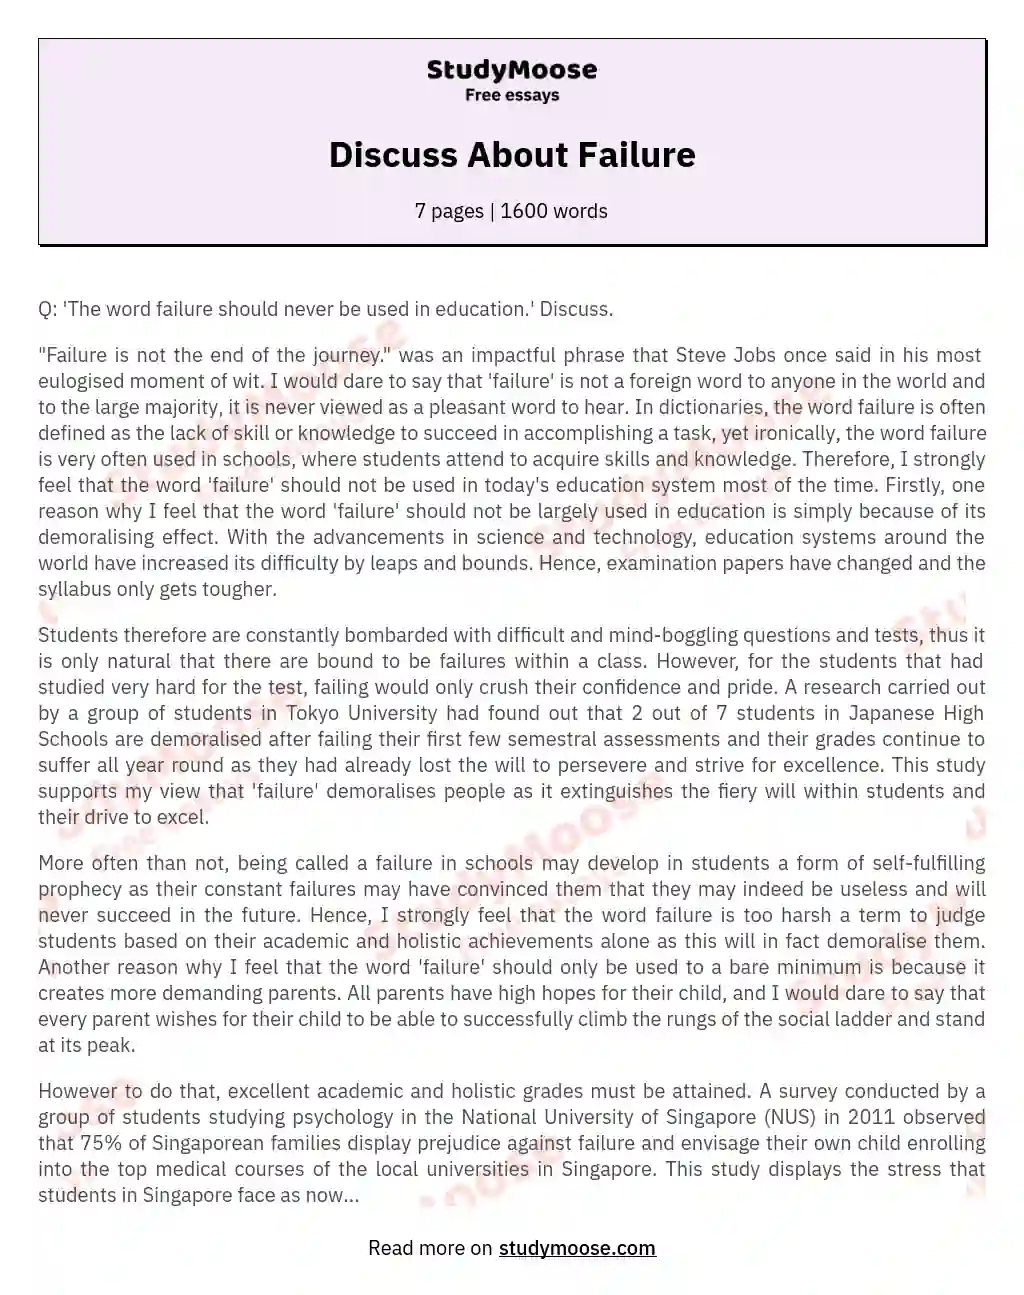 Discuss About Failure